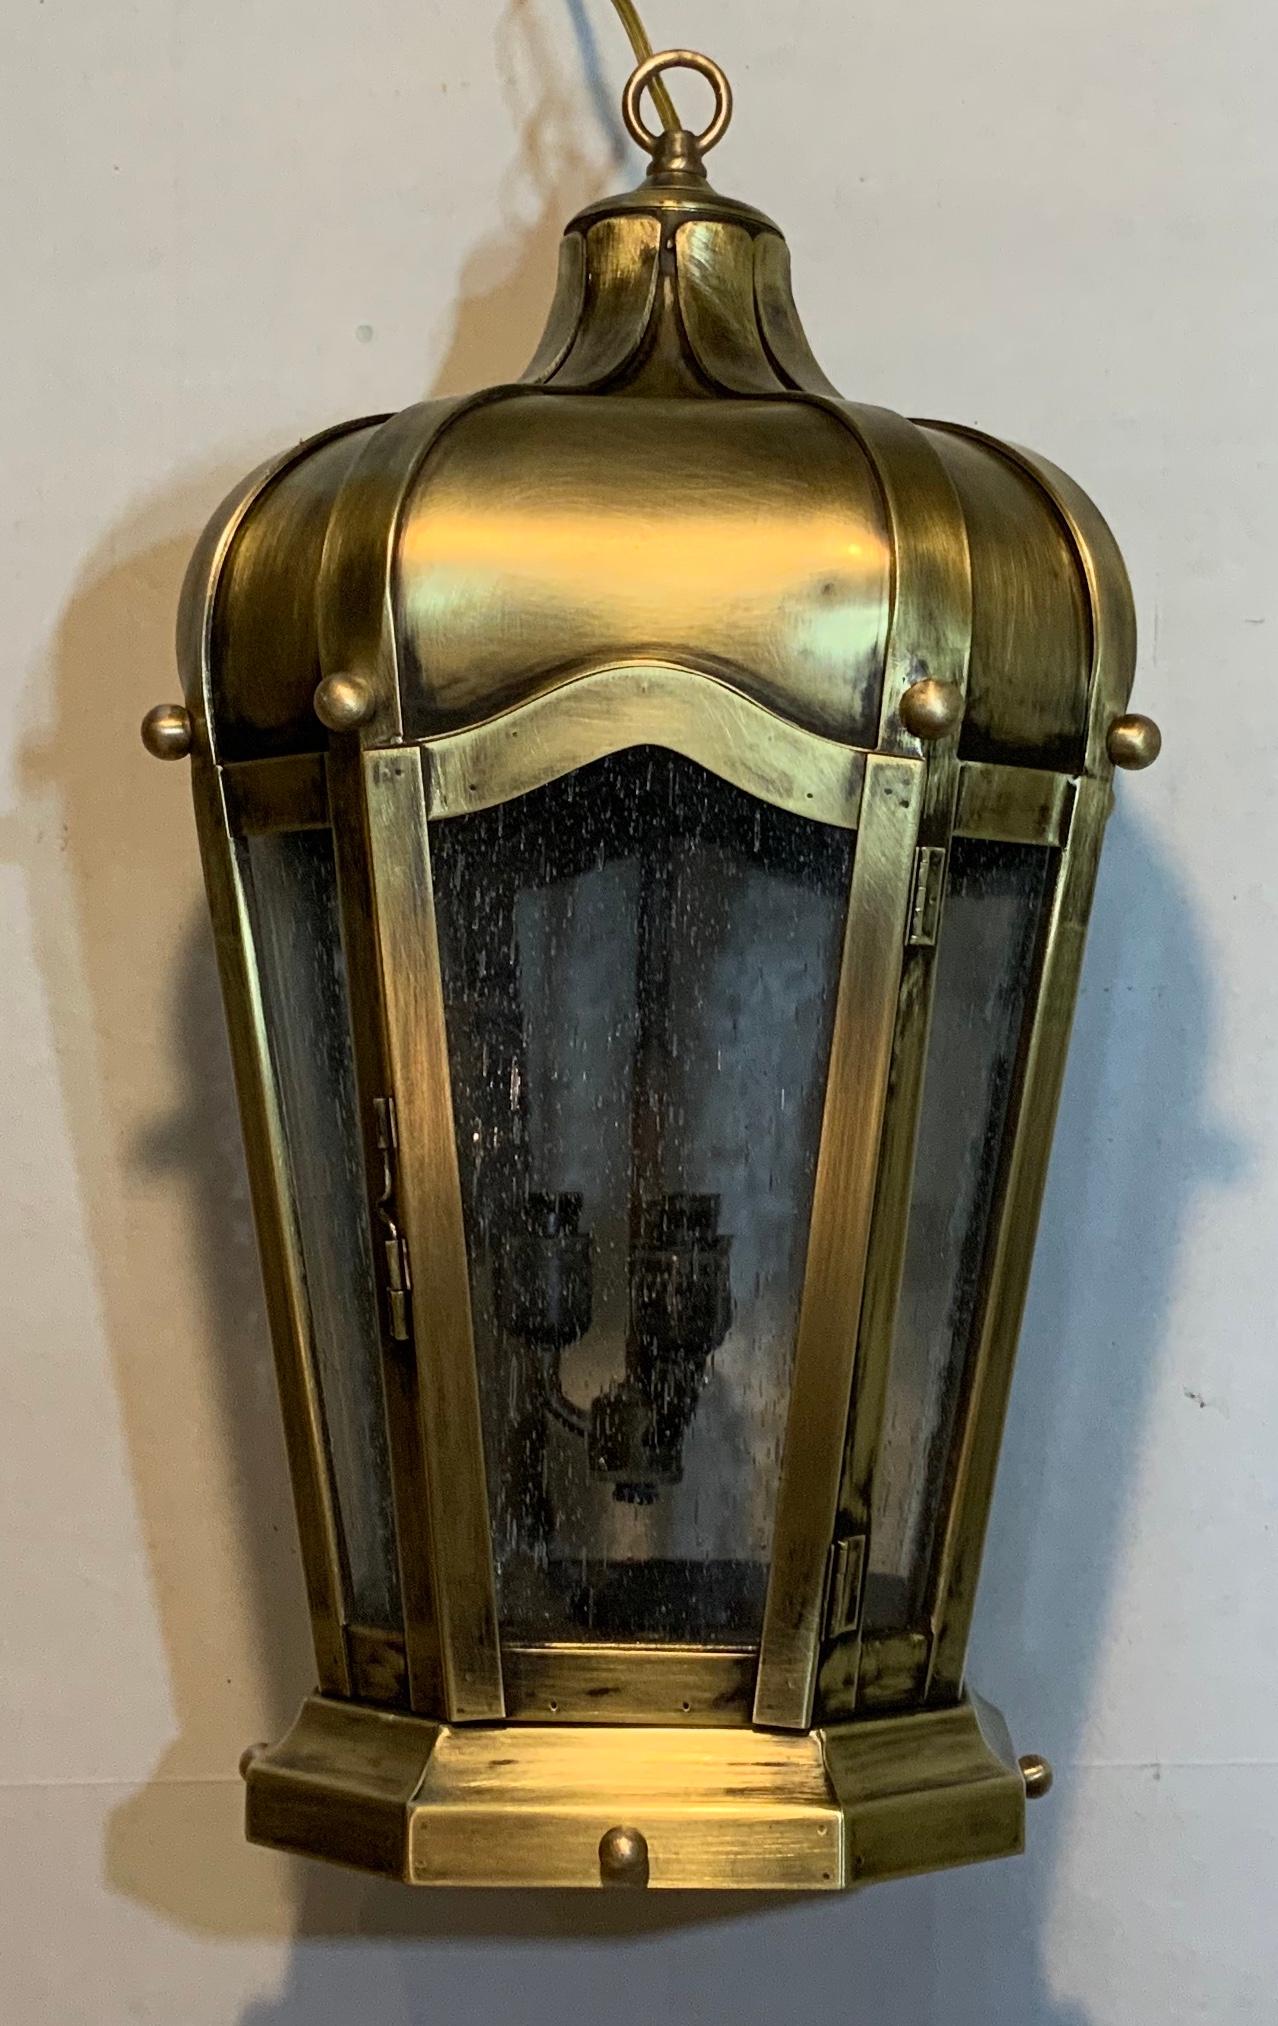 Beautiful hanging ceiling lantern in crown style top, made of solid brass. Quality handcrafted, with seeded glass. Eelectrified with three 40/watt lights, suitable for wet locations, ready to use.
Will look great indoor or outdoor.